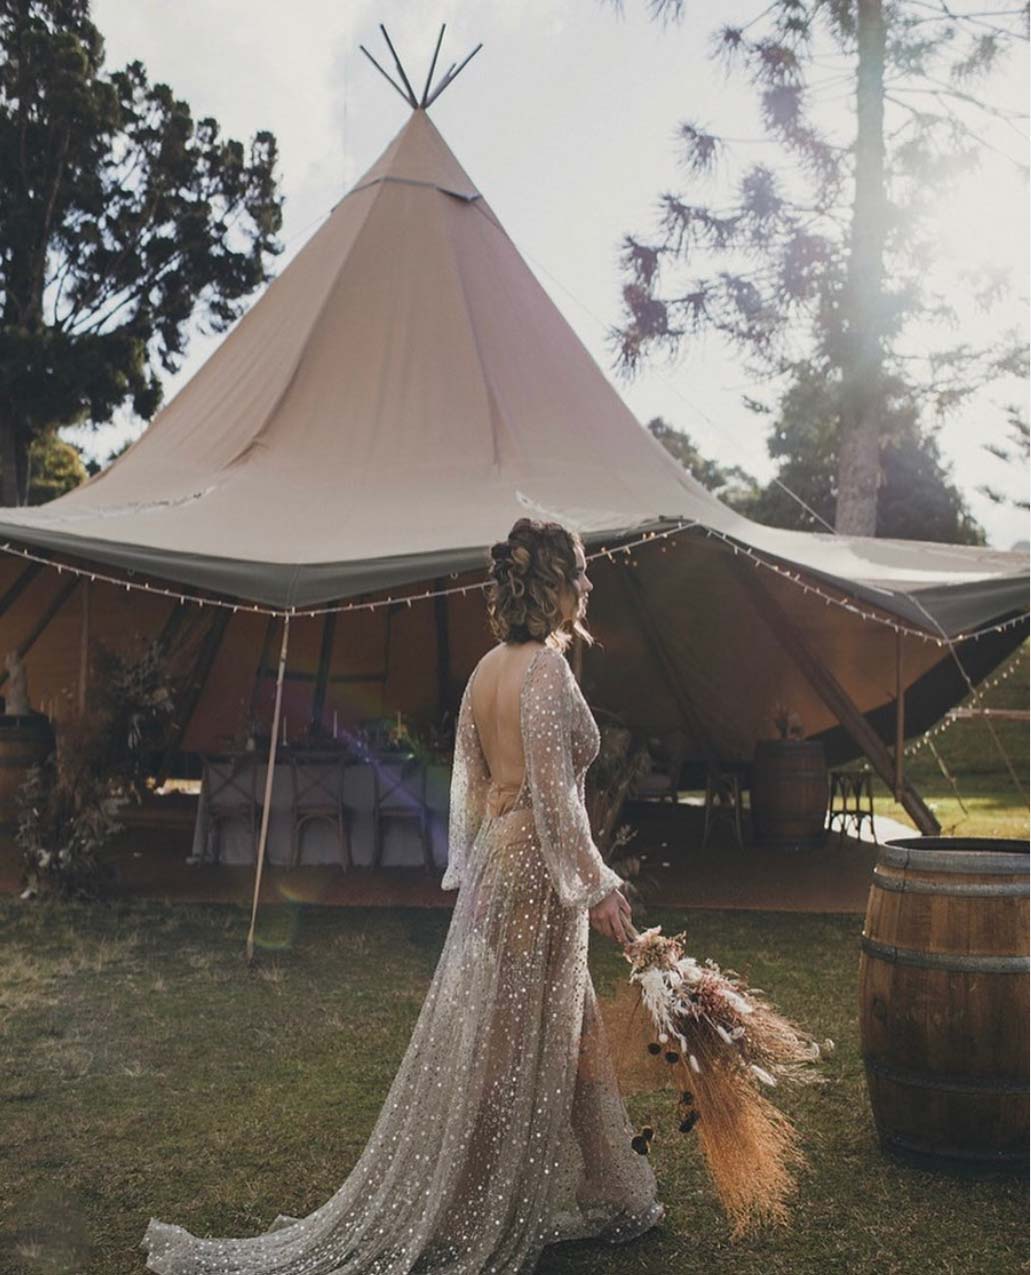 Ecru translucent wedding gown with elegant sparkles, bride with a teepee at a boho wedding